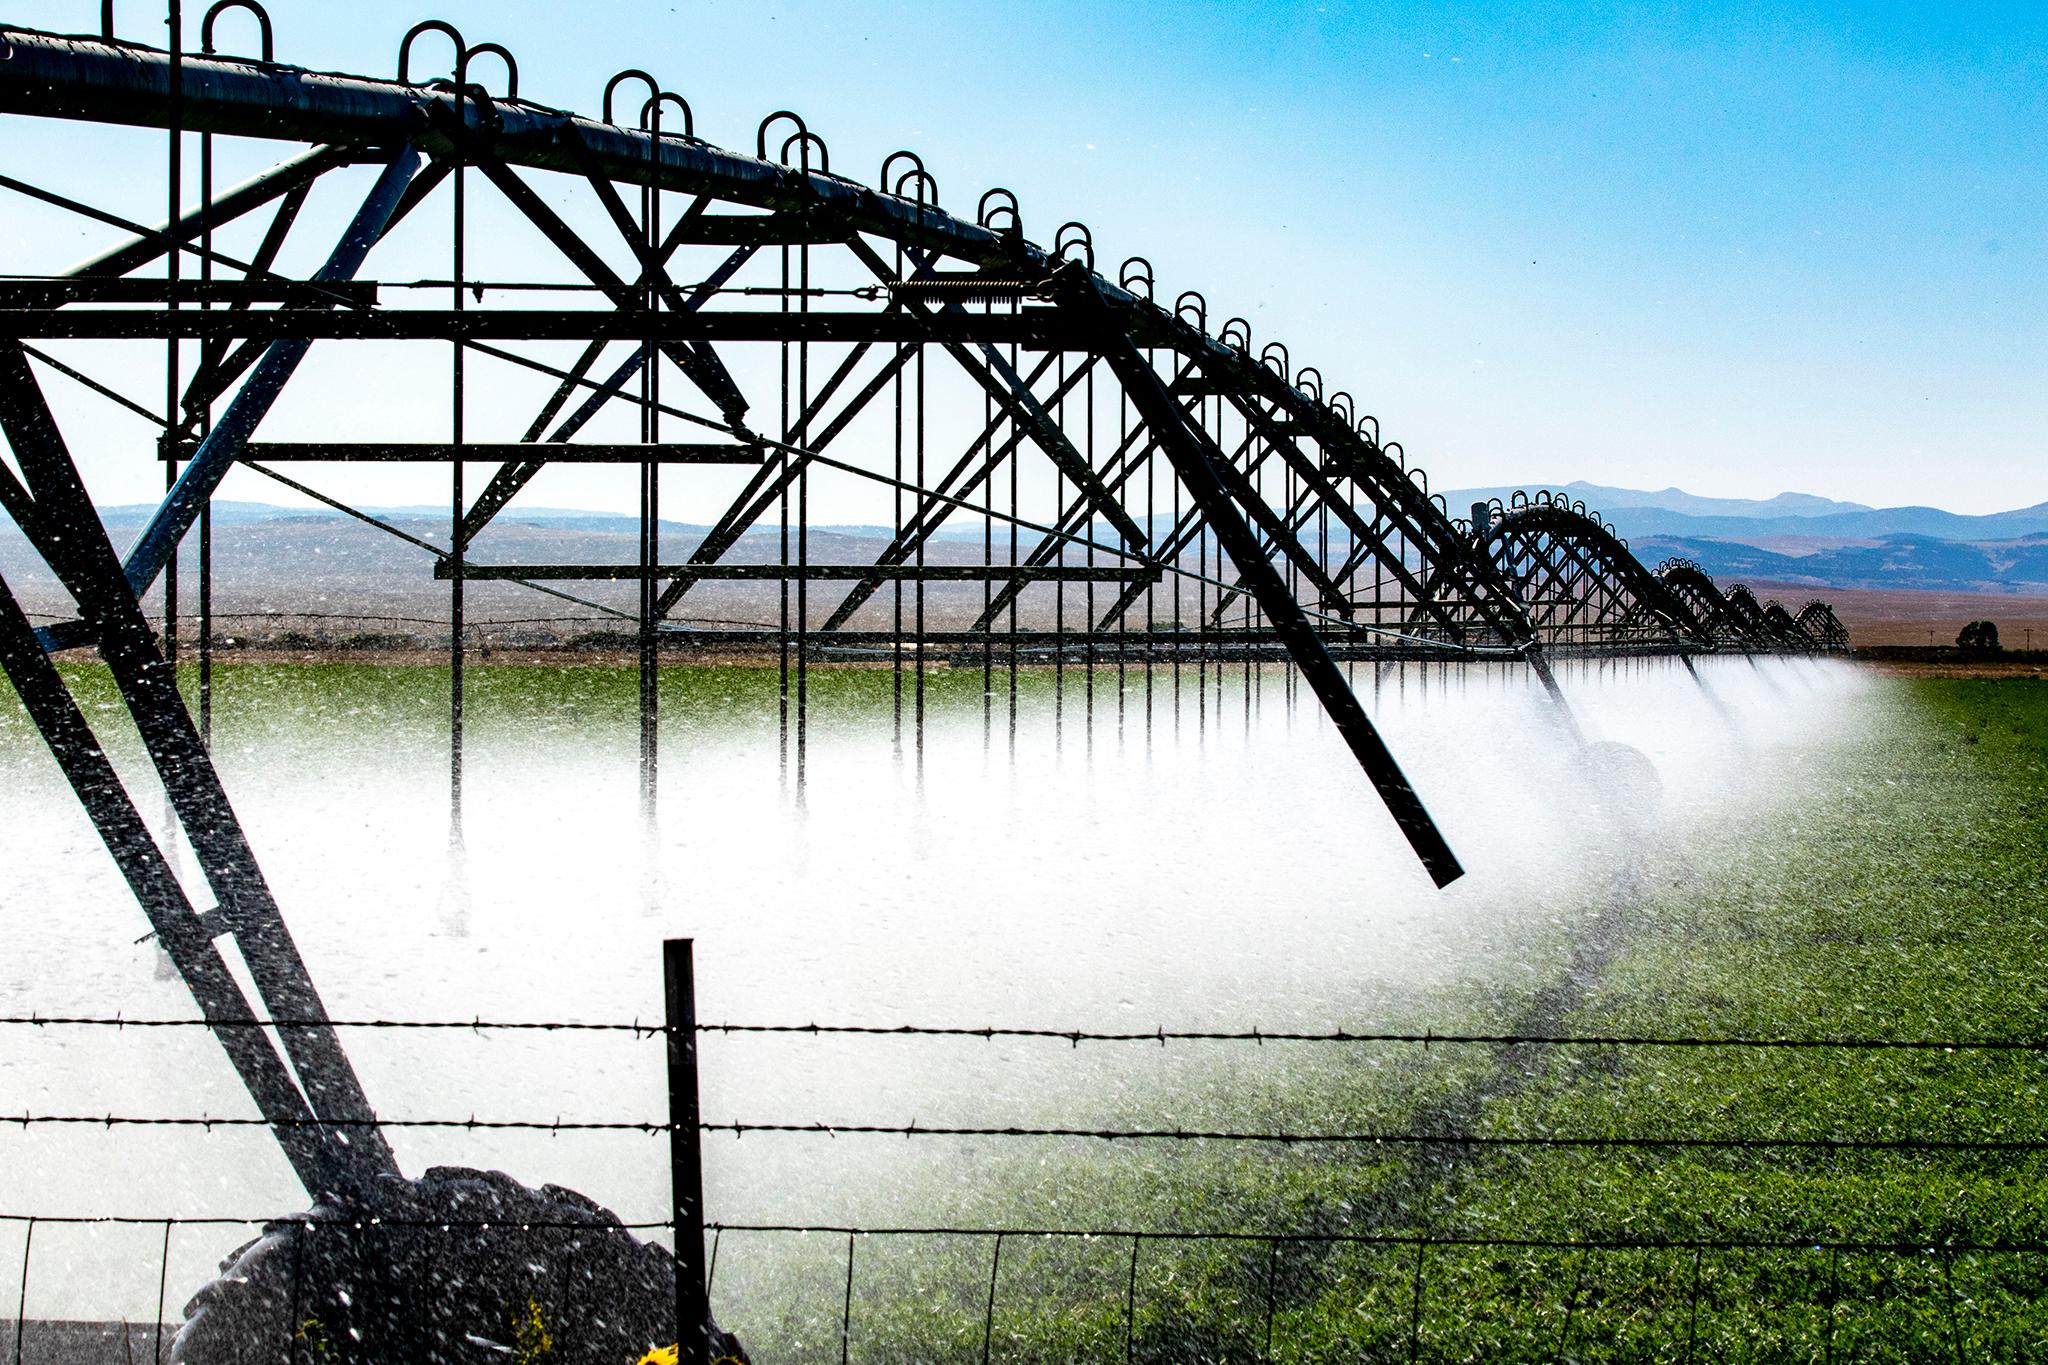 Irrigation outside of Antonito in the San Luis Valley. Aug. 25, 2021.